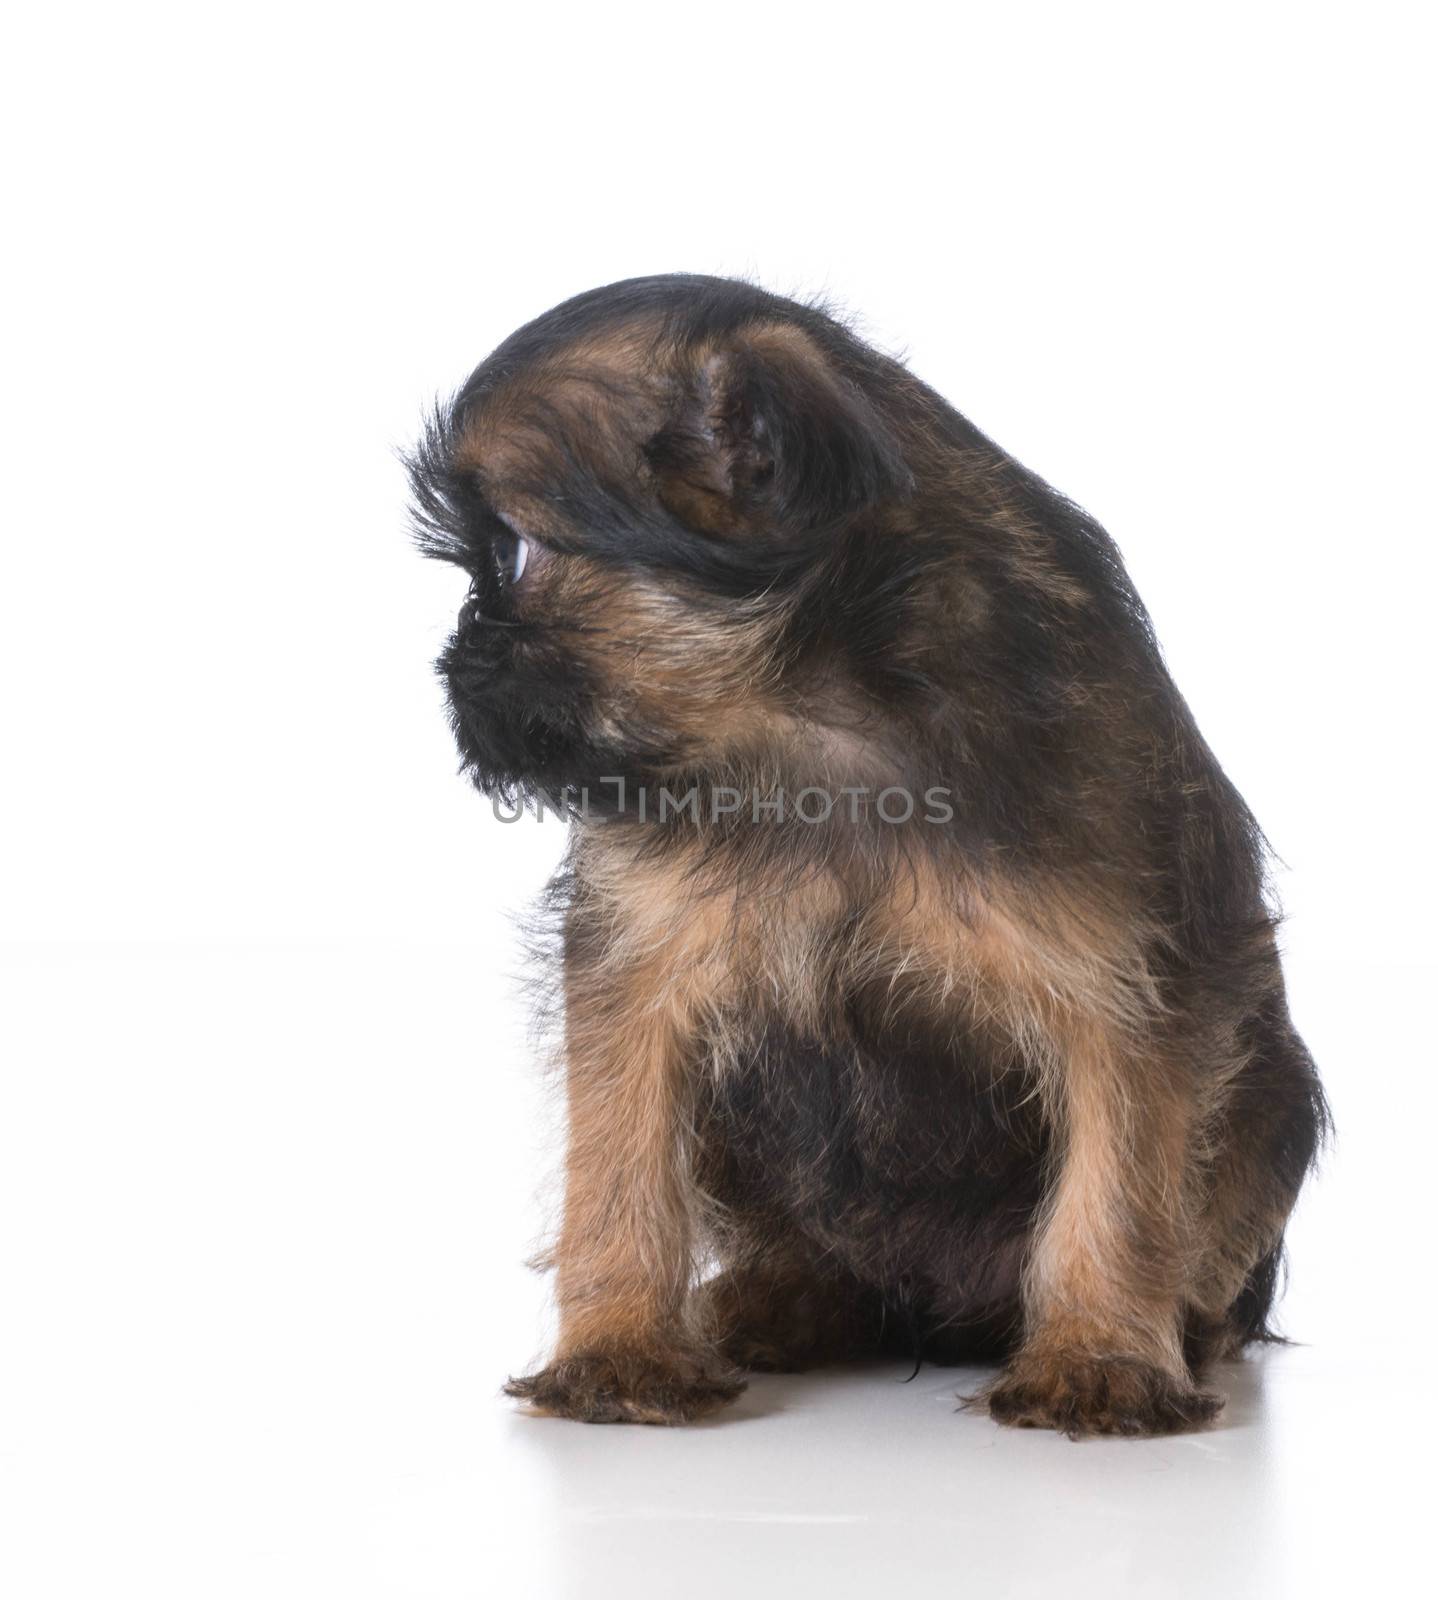 sad looking puppy sitting on white background - brussels griffon